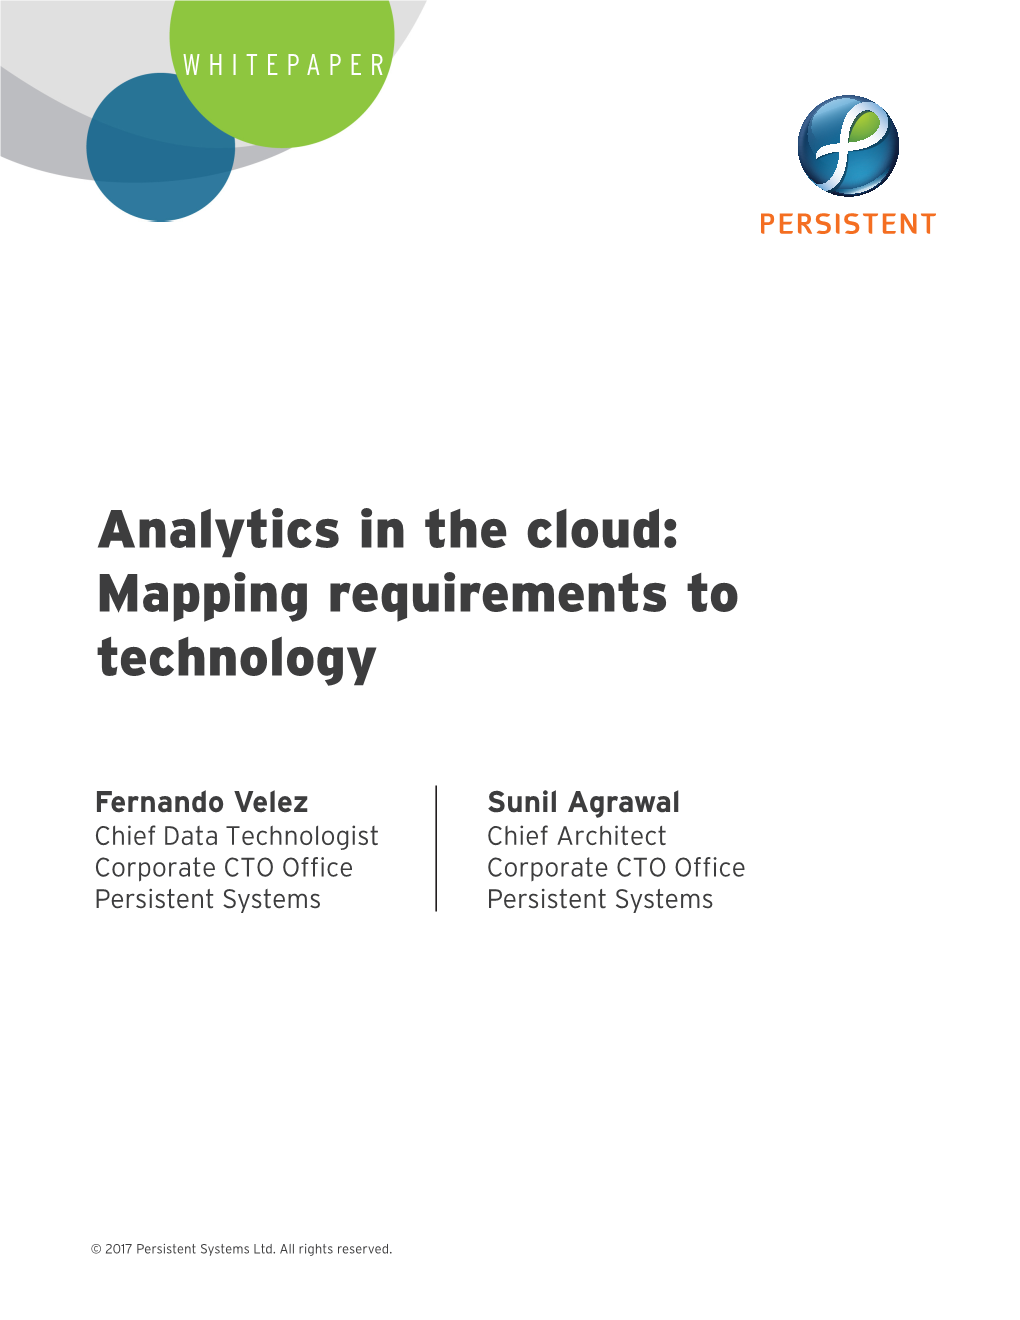 Analytics in the Cloud: Mapping Requirements to Technology